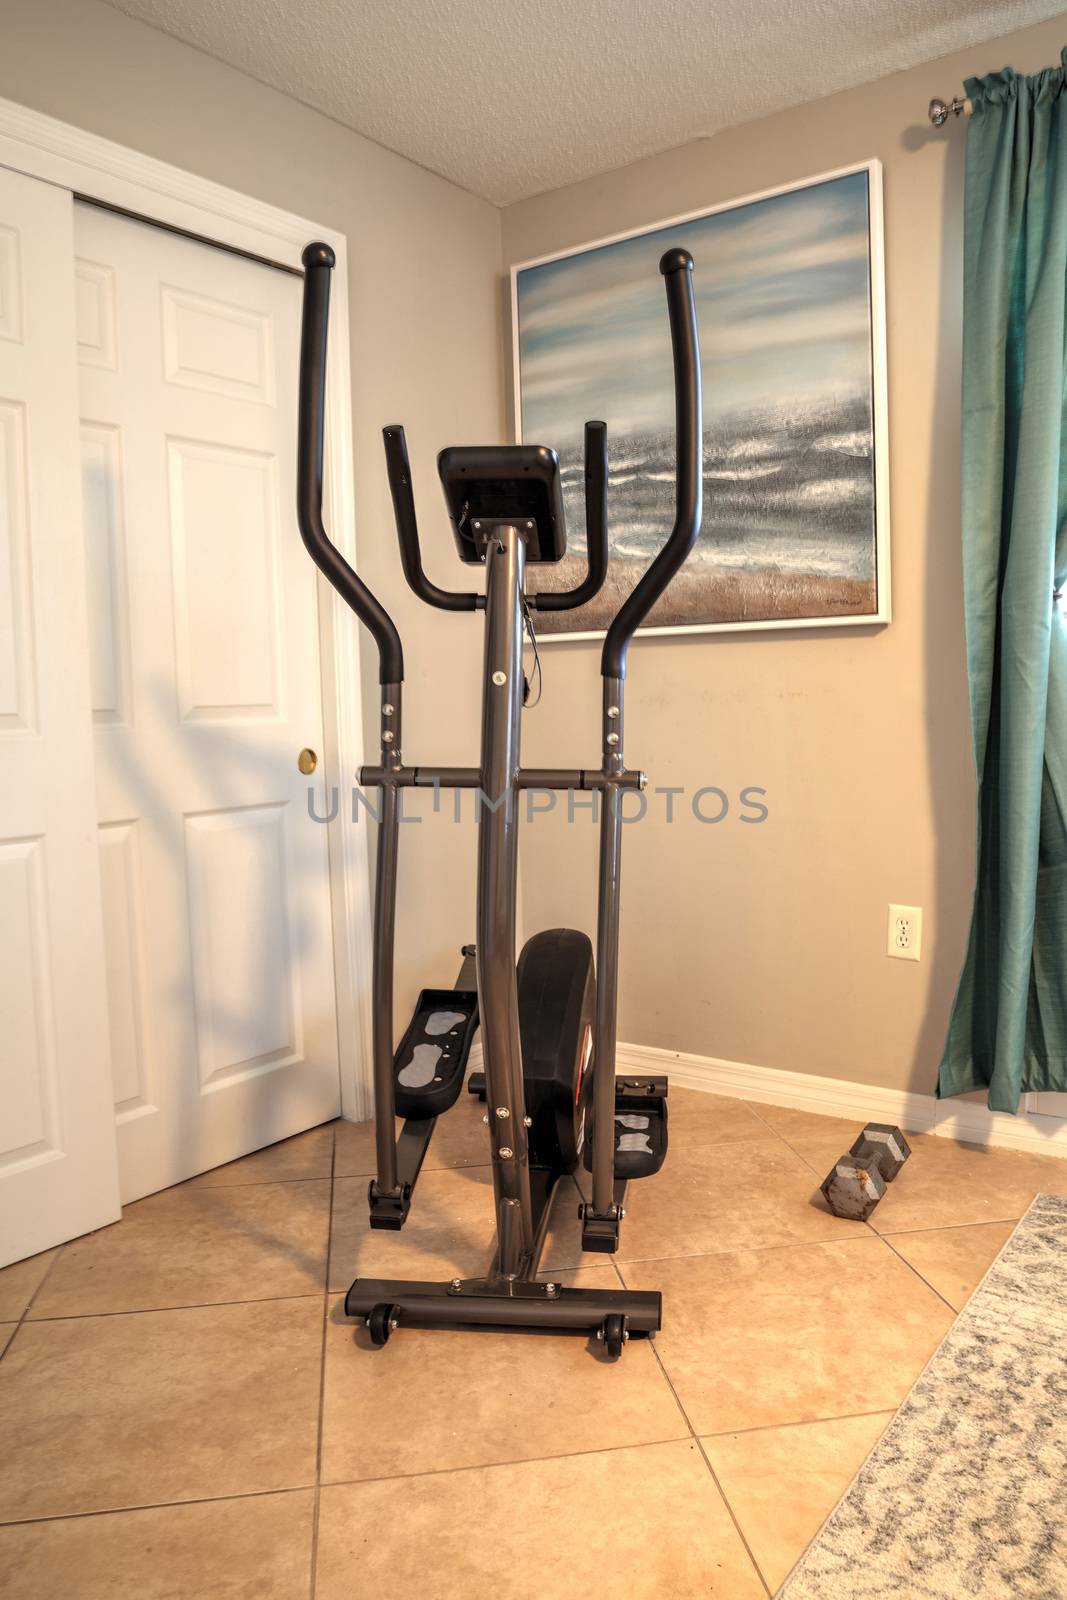 Elliptical machine in a home gym for home exercise by steffstarr